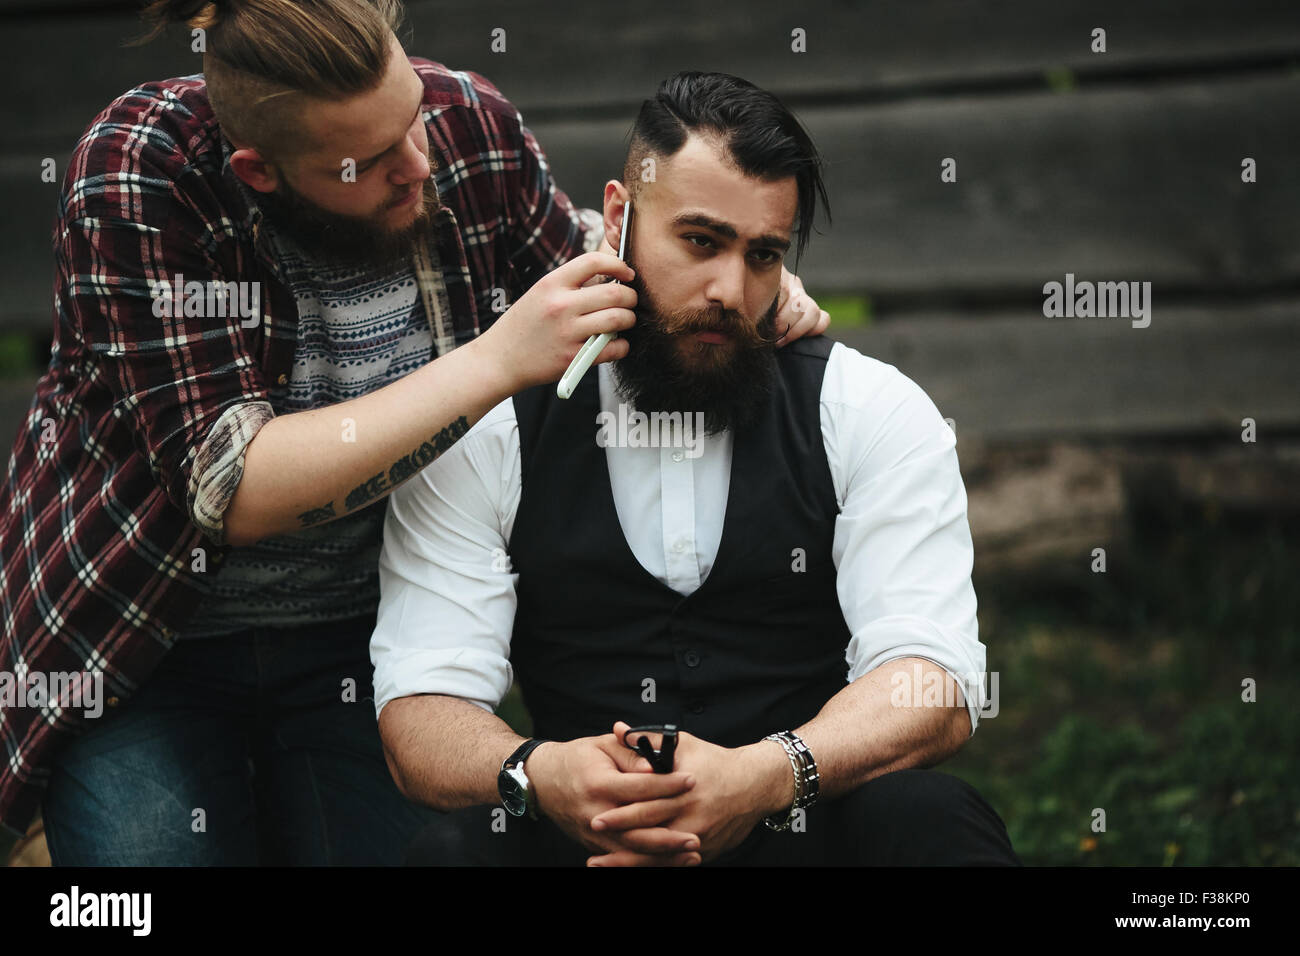 barber shaves a bearded man Stock Photo